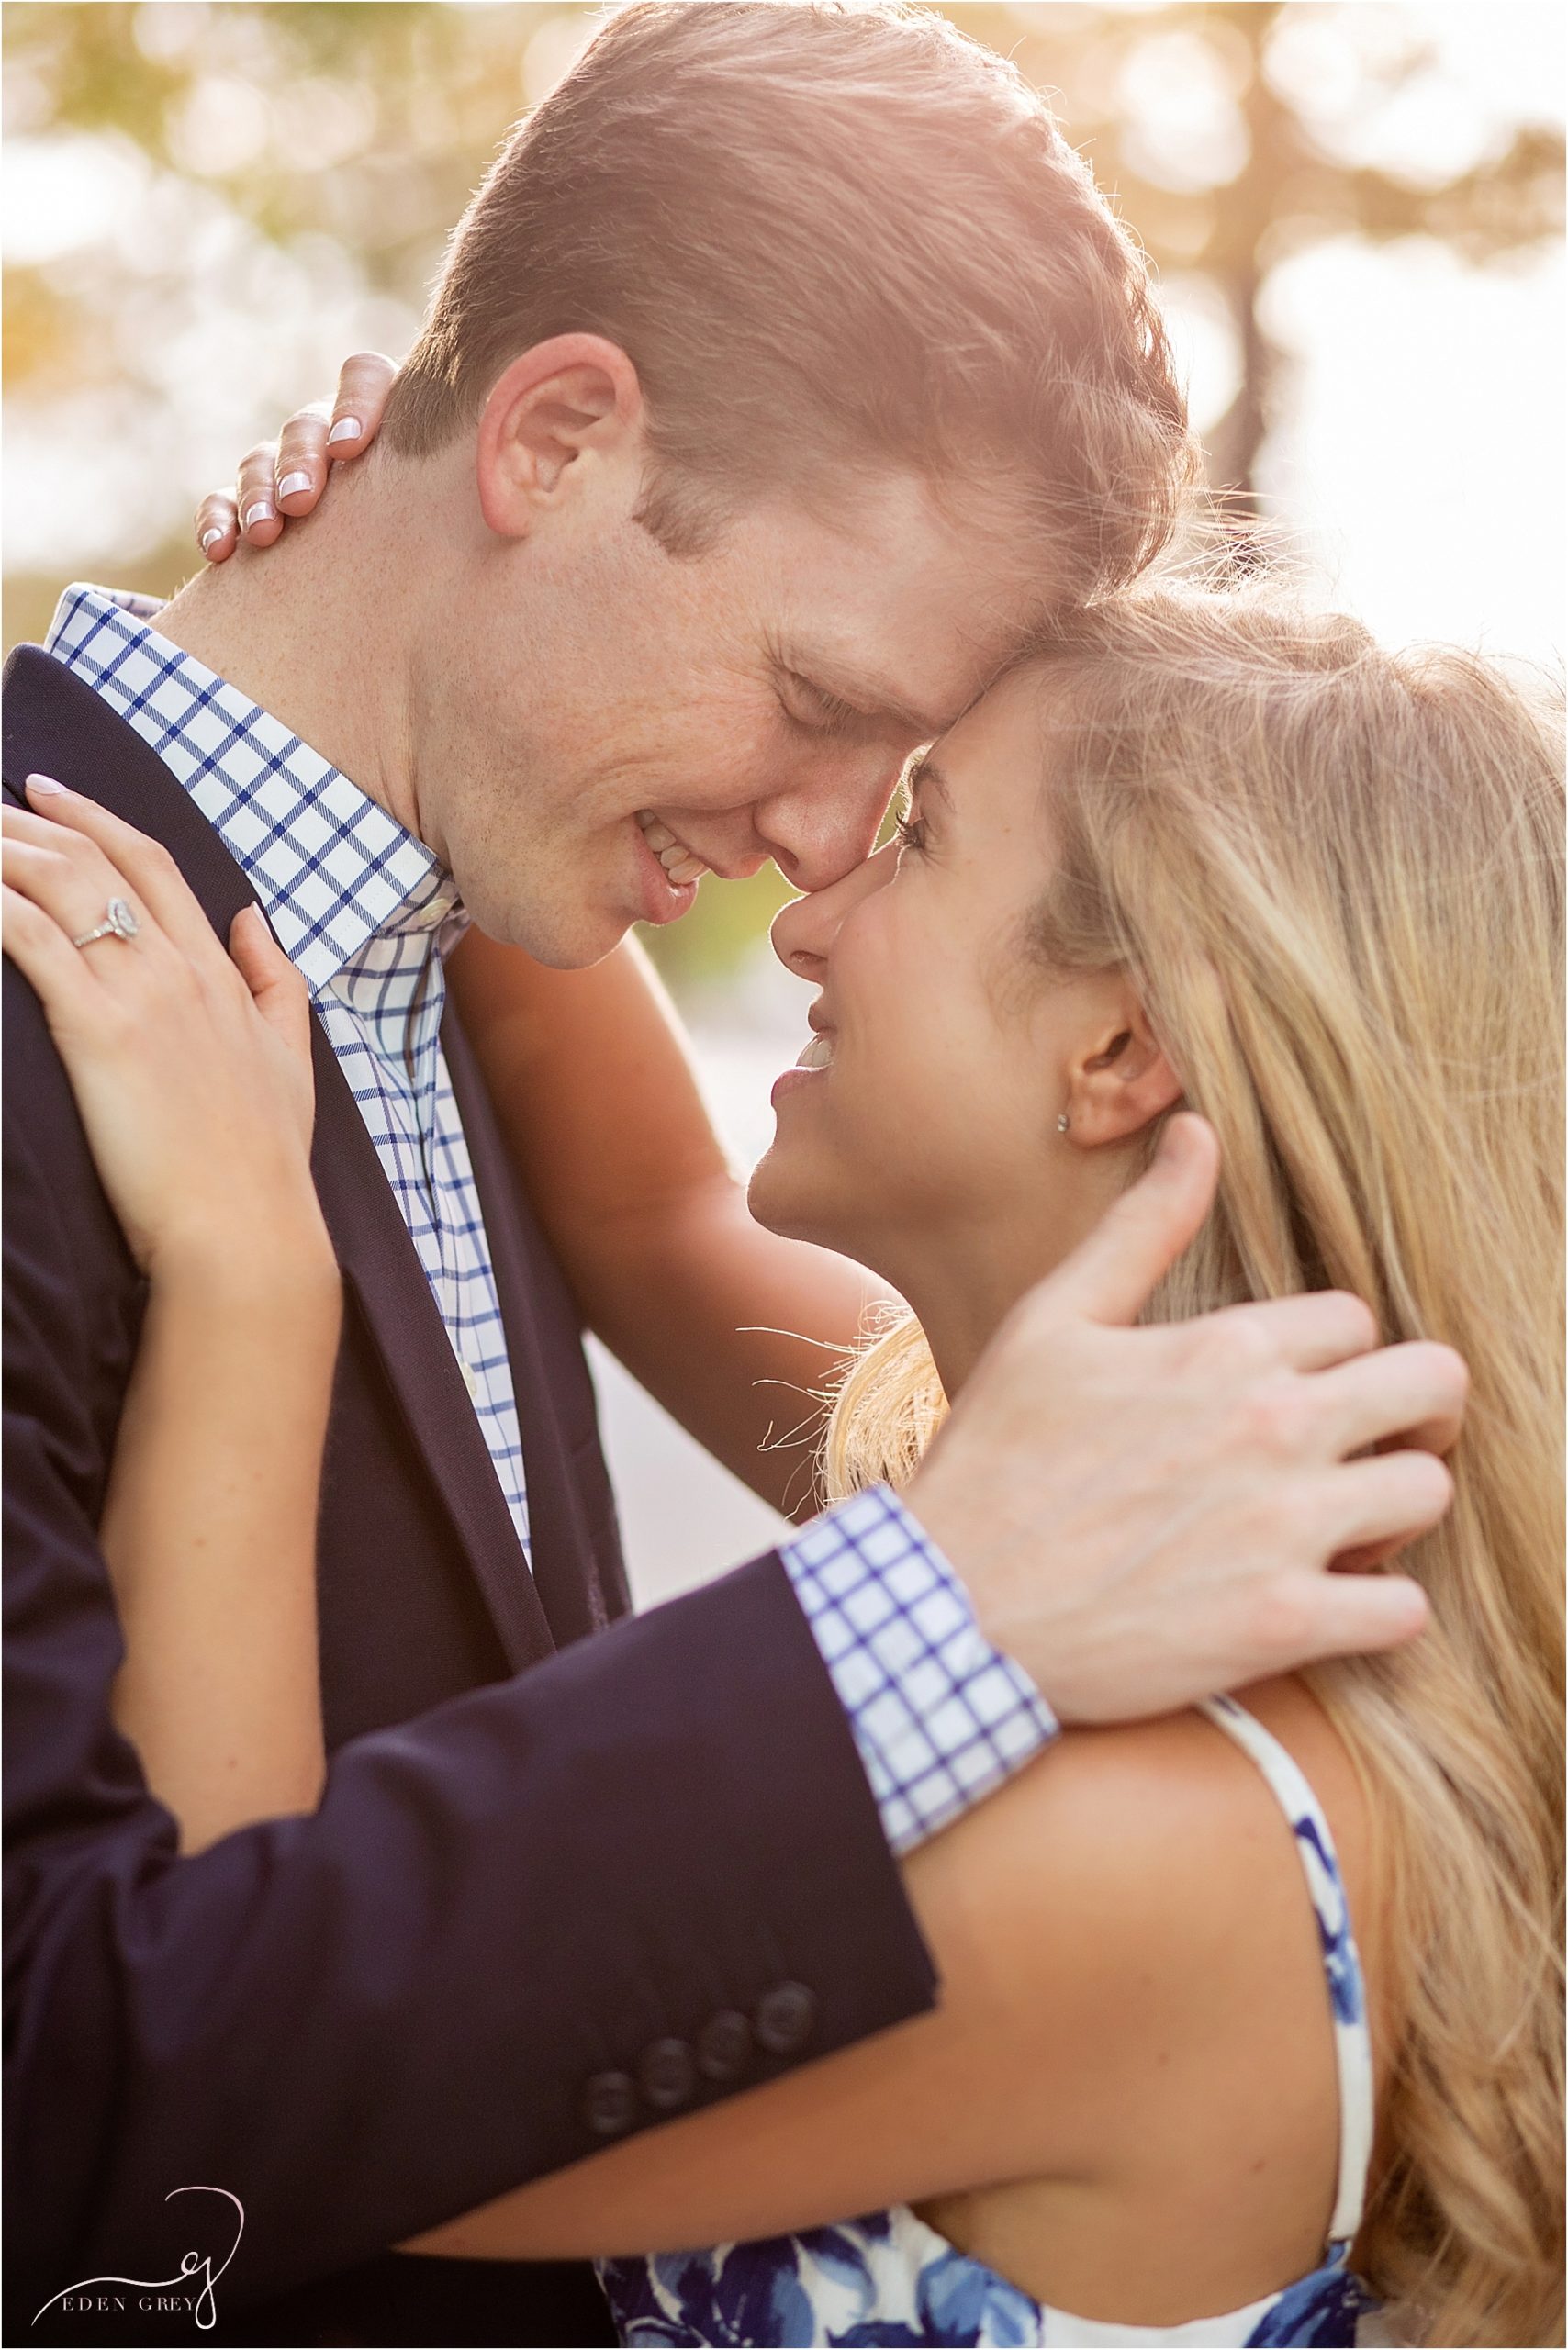 Natural and Emotional Engagement Pictures in Dallas